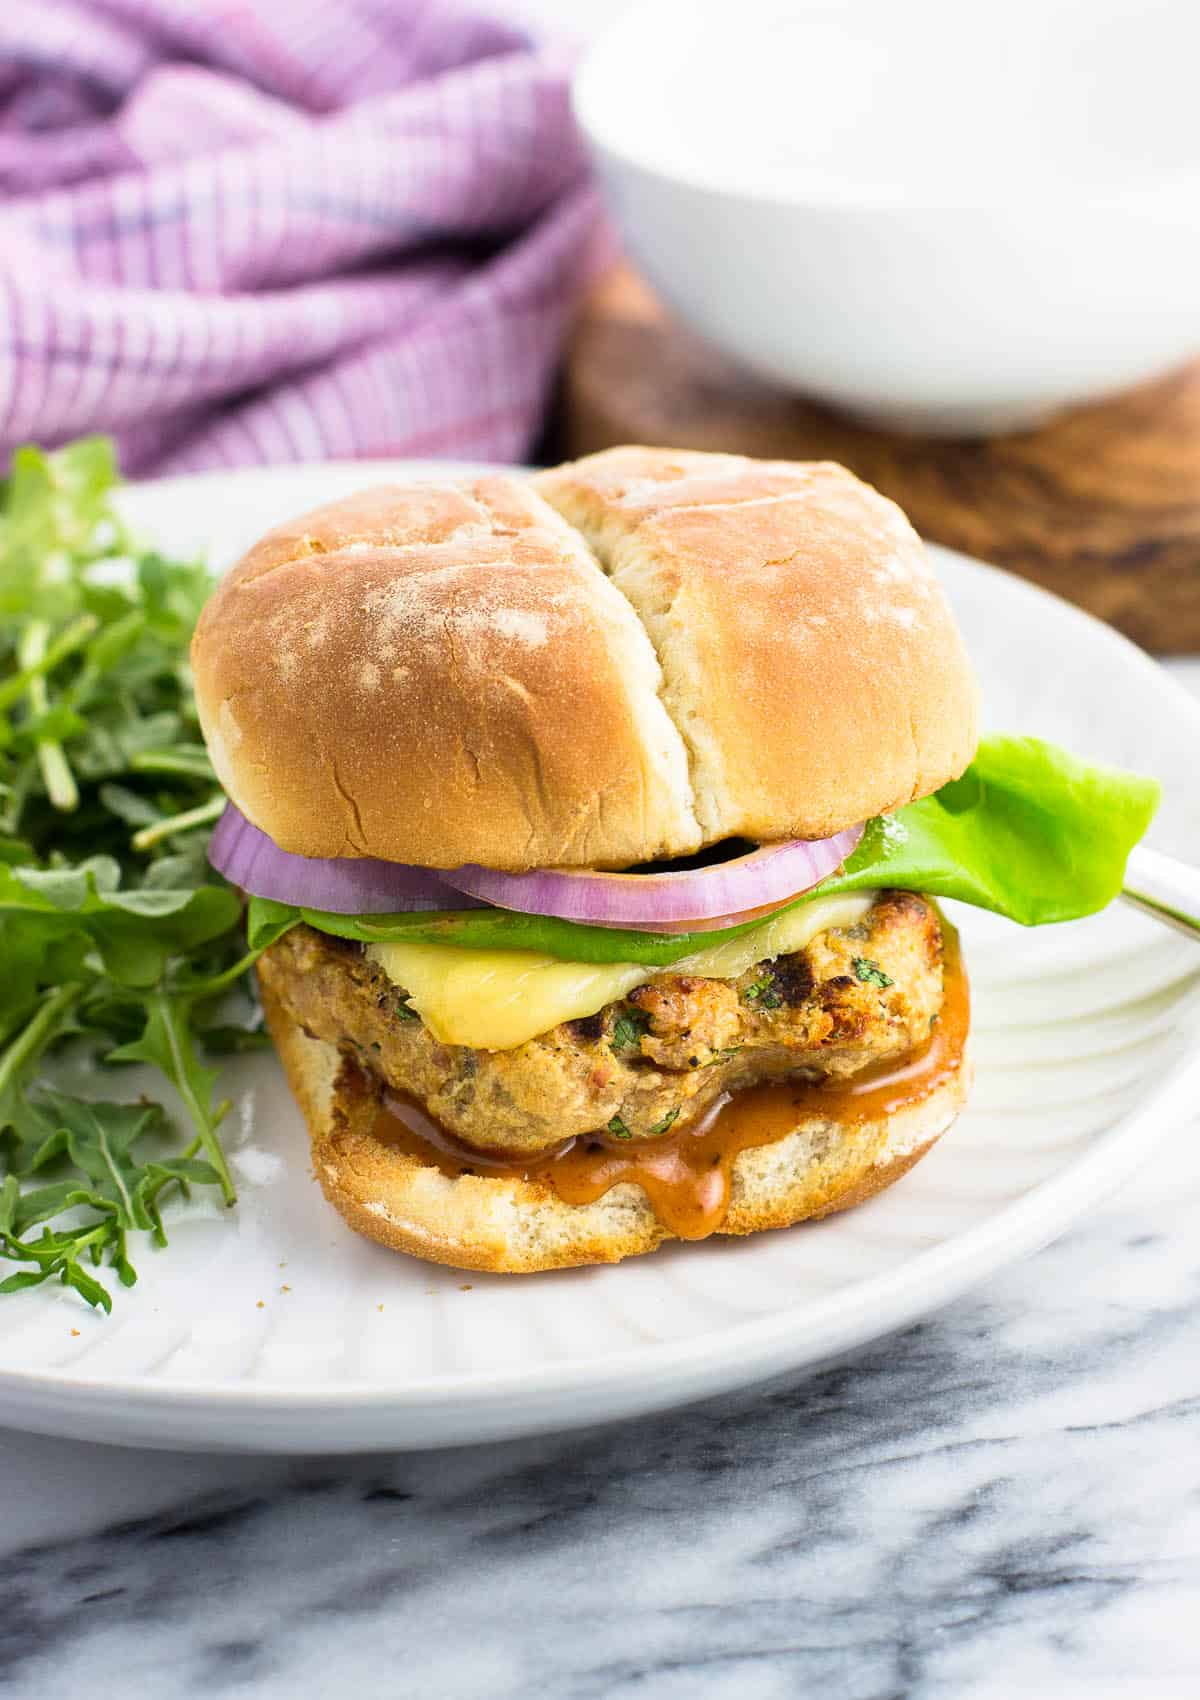 A chicken burger on a bun with toppings on a plate with salad.